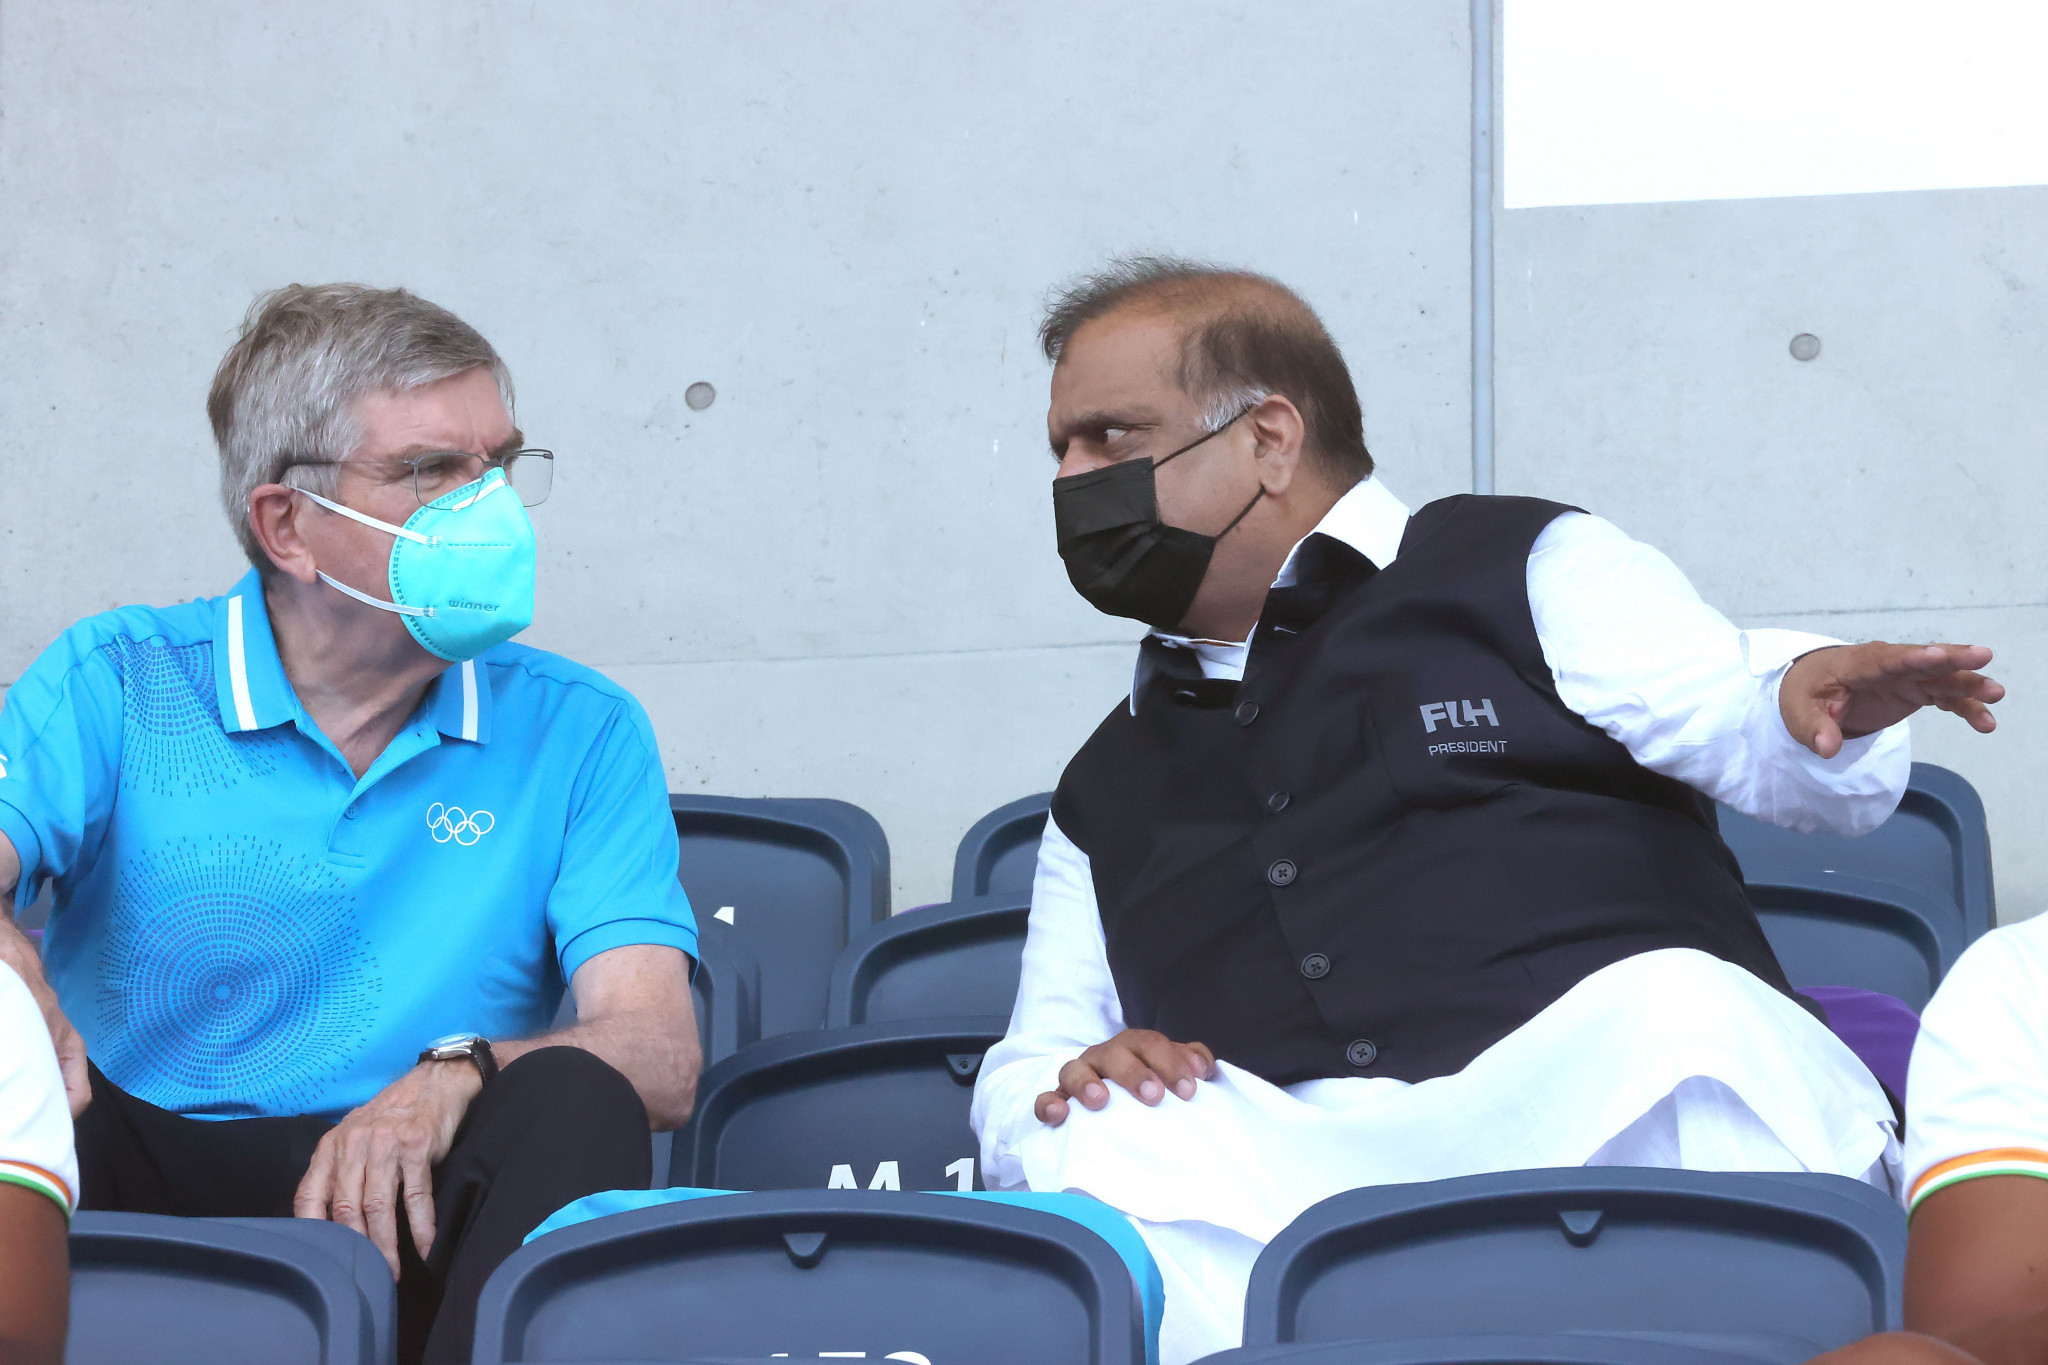 Narinder Batra, right, stepped down as FIH President having held the position since 2016 ©Getty Images